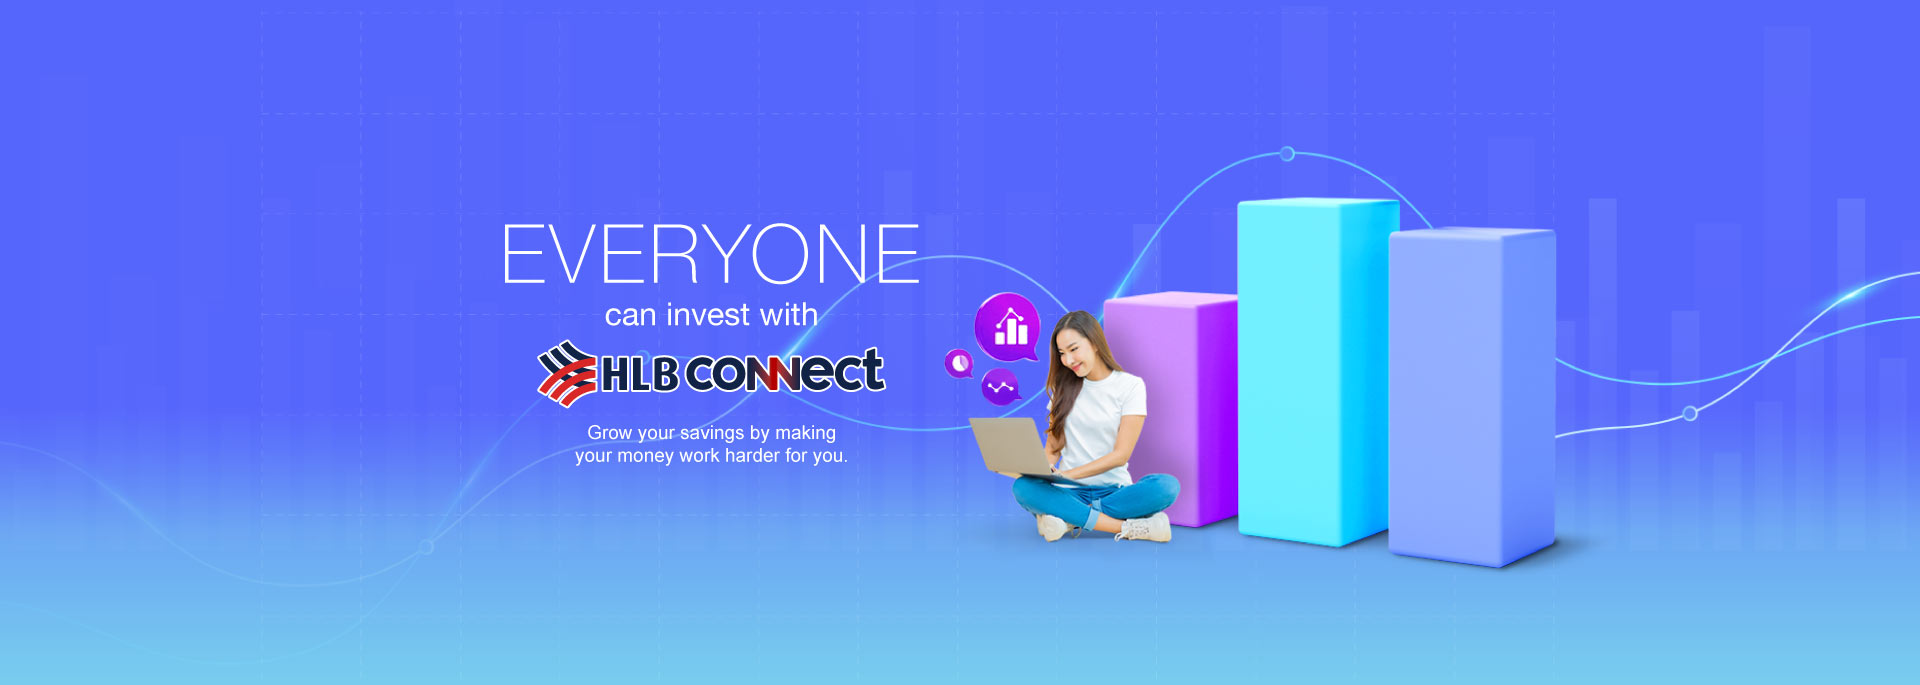 Everyone can invest with HLB Connect